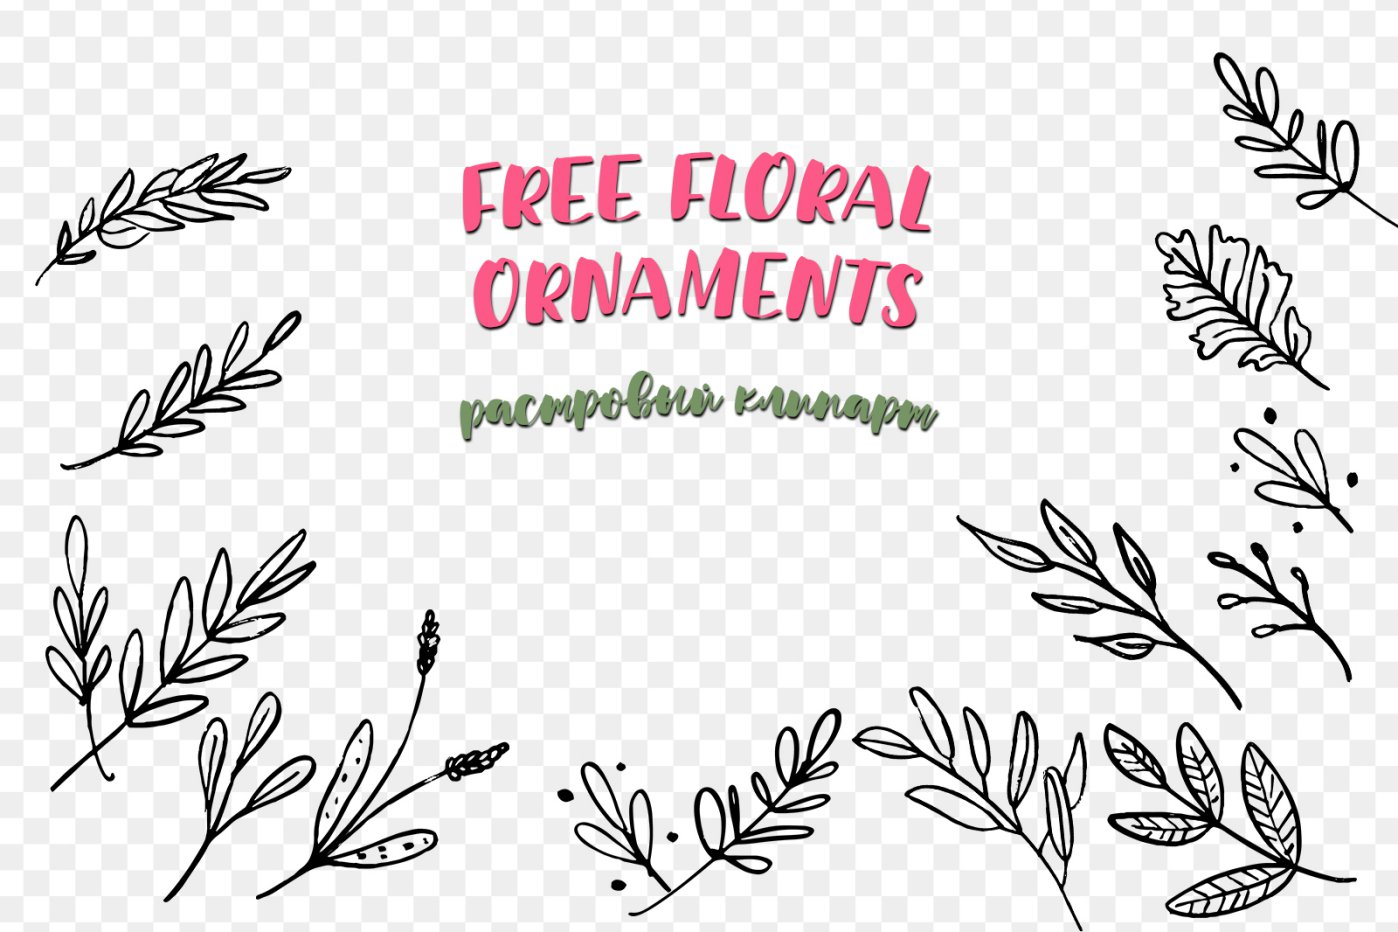 Free Floral Ornaments png